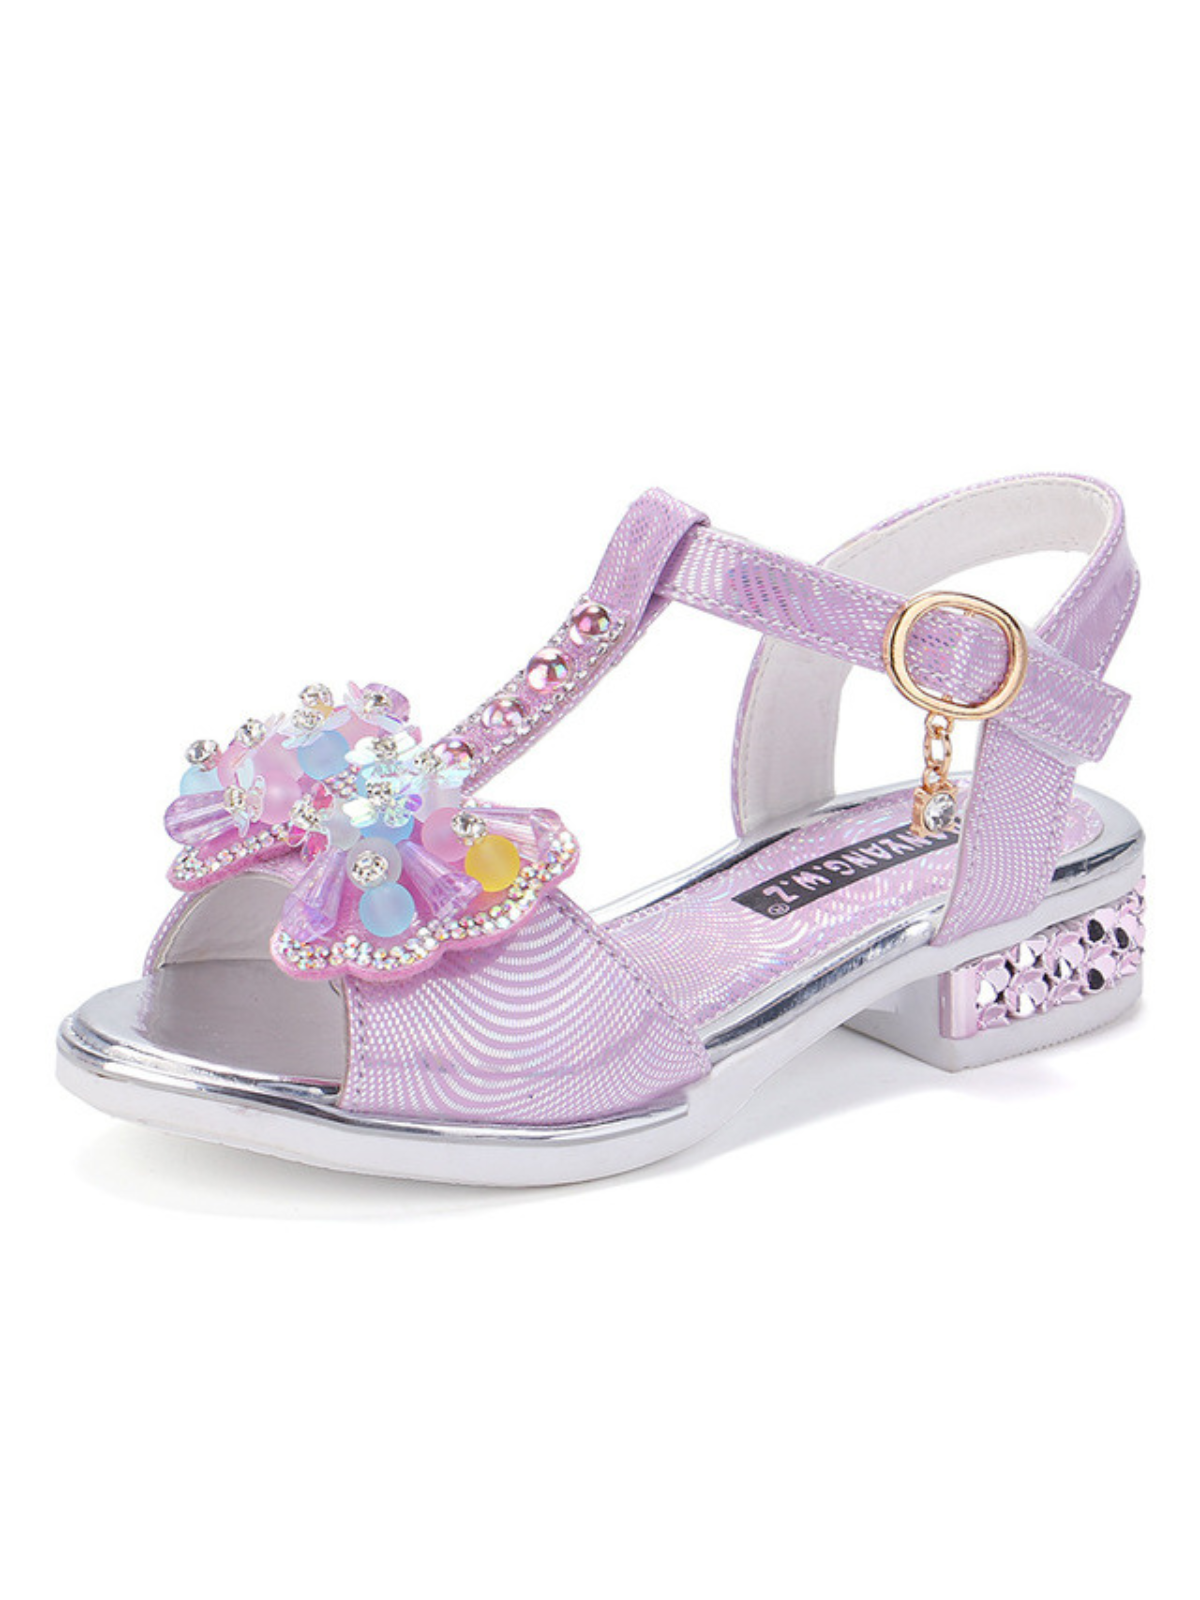 Mia Belle Girls Bejeweled T-Strap Sandals | Shoes By Liv and Mia